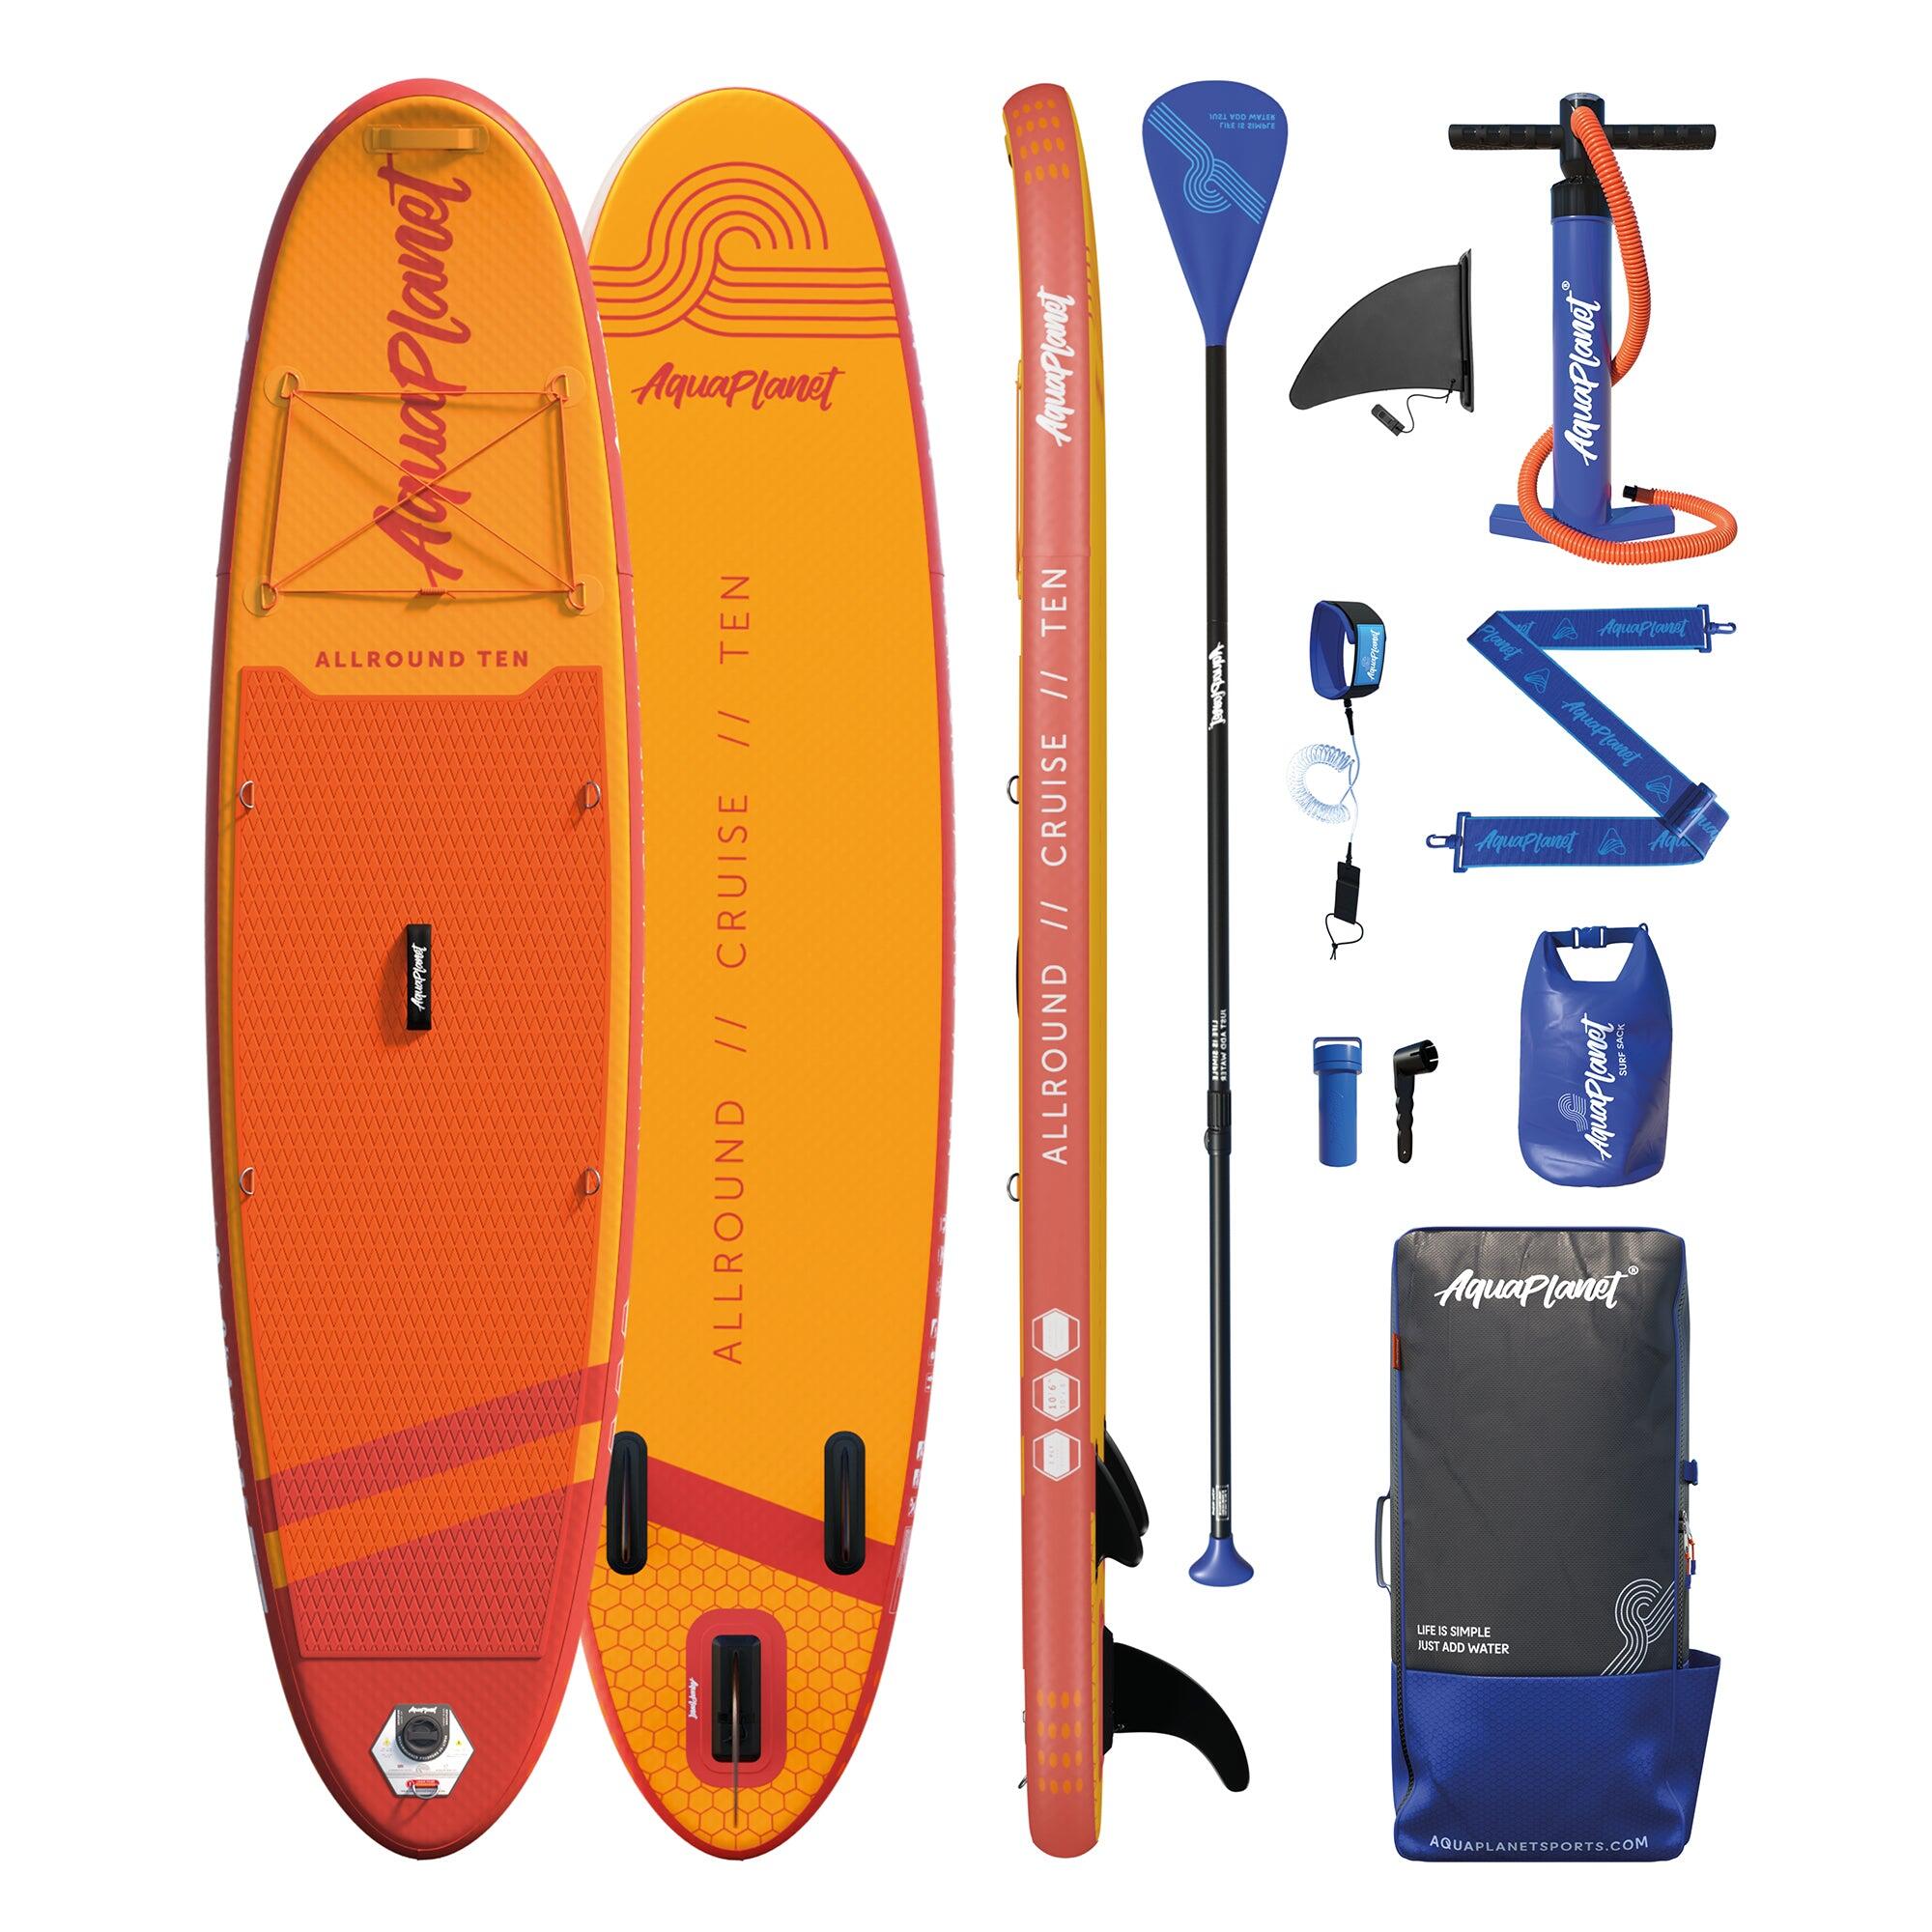 Aquaplanet ALLROUND TEN 10’ Inflatable Paddle Board Package - Orange 1/5